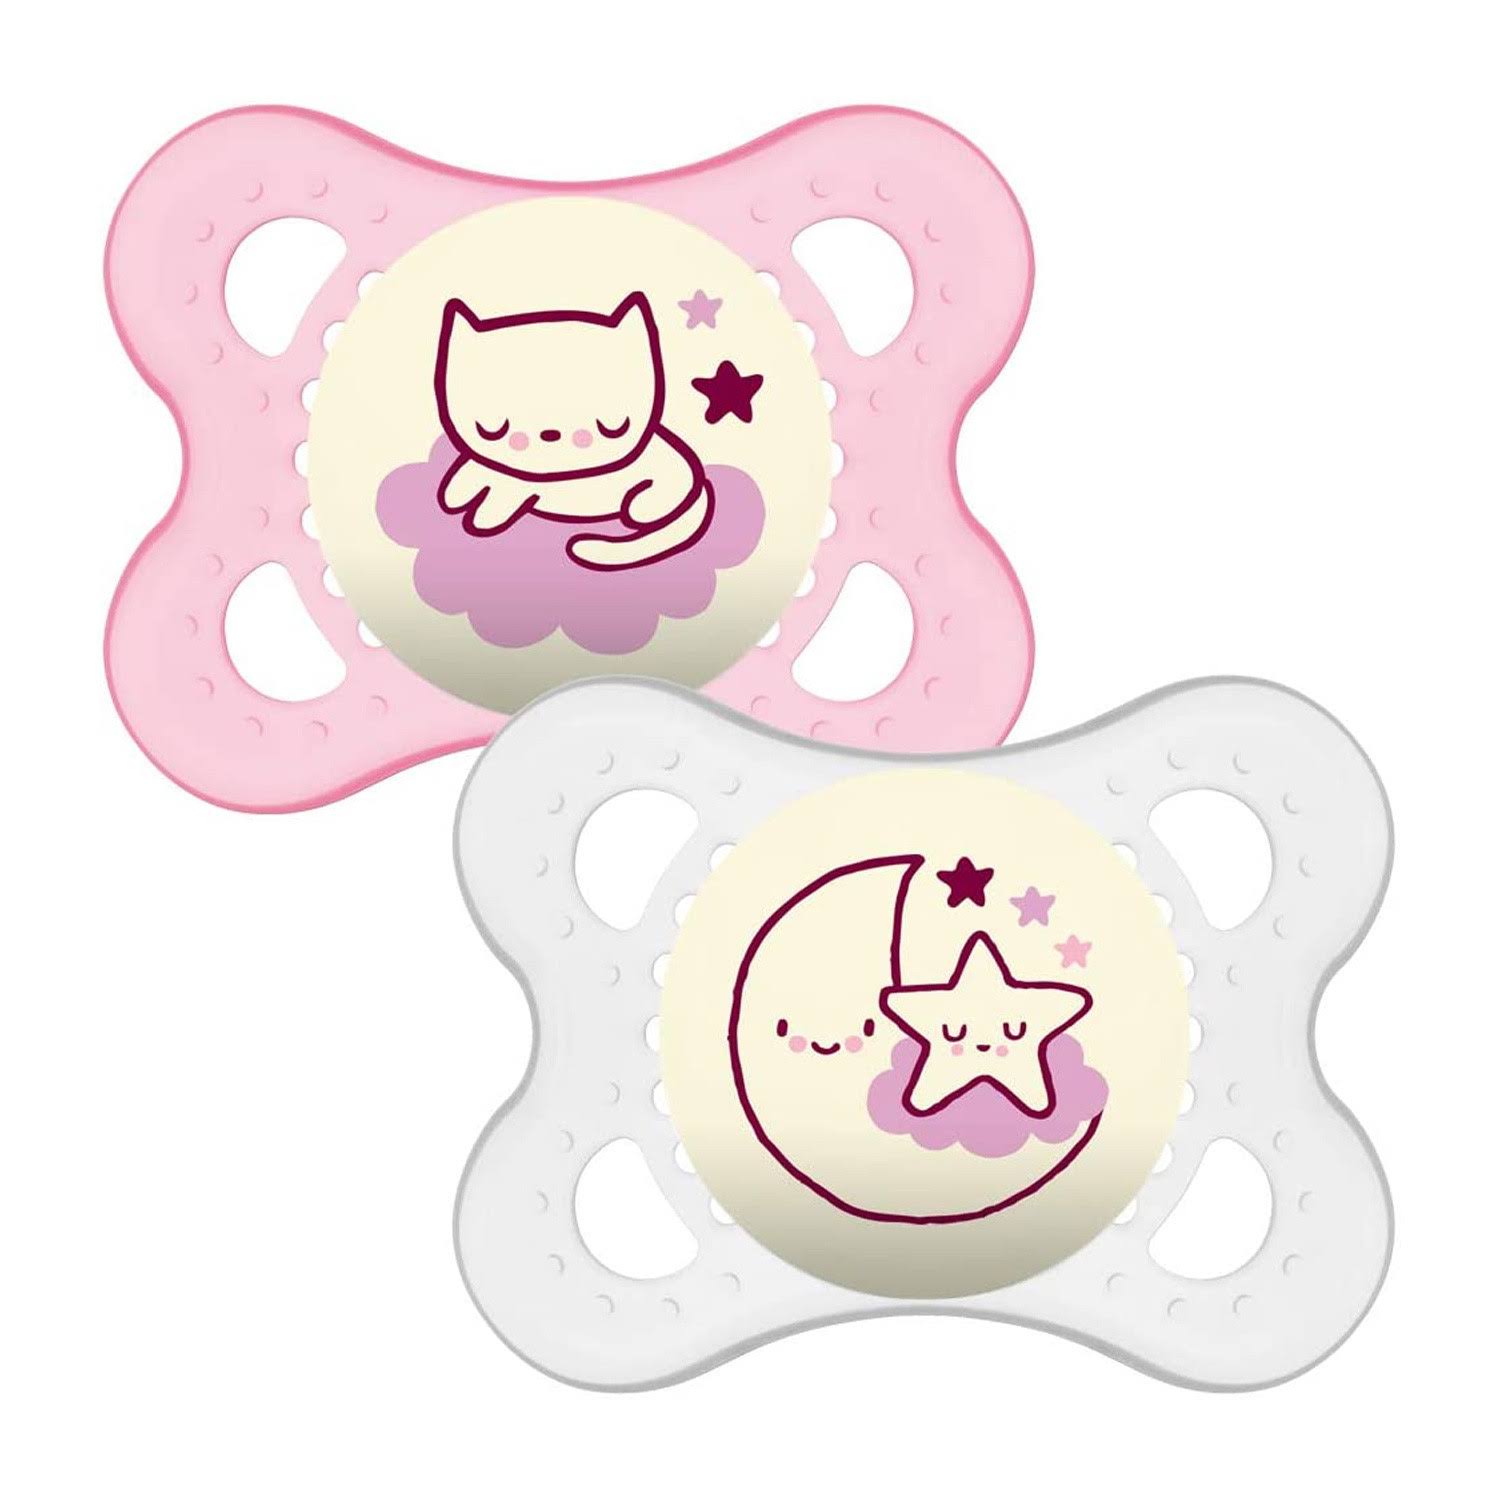 MAM Night Soother 2 Pack, Pink